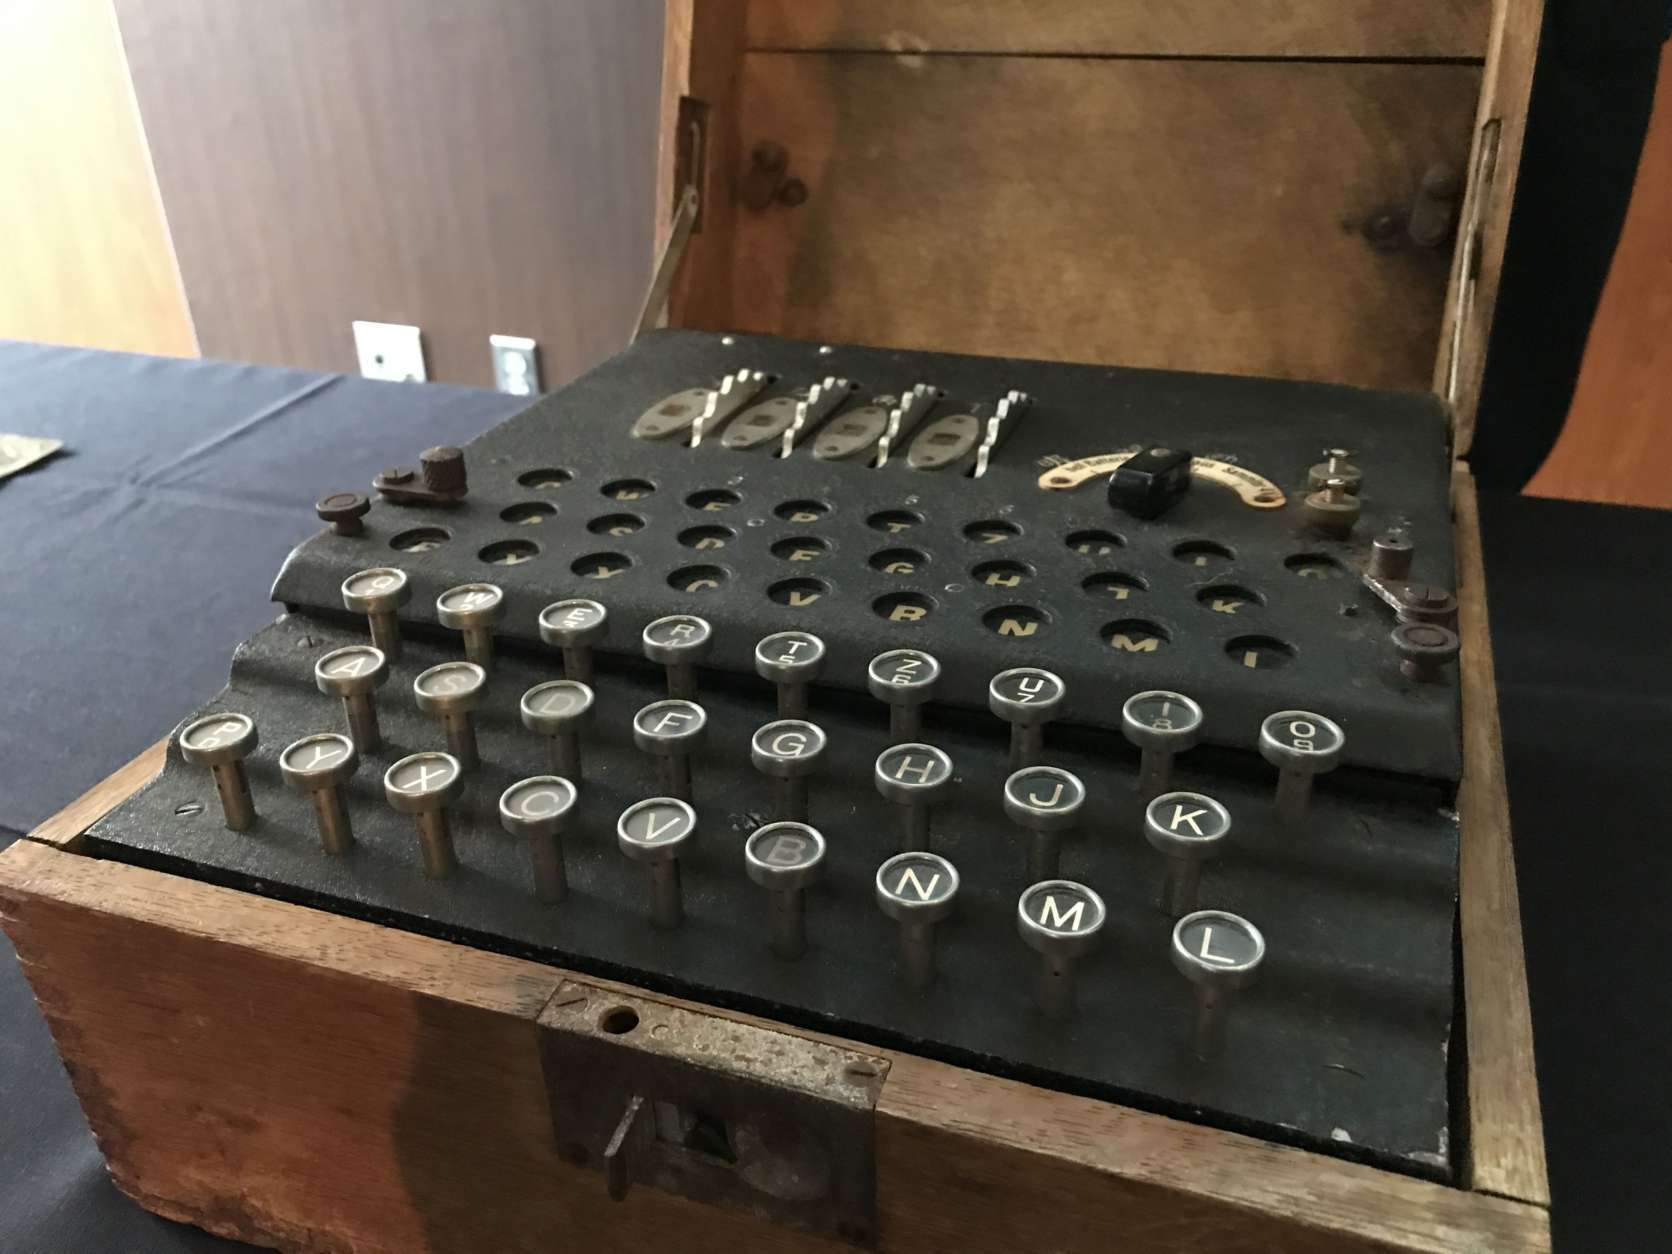 Among the new additions to the International Spy Museum wlll be an Enigma cypher. (WTOP/Ginger Whitaker)